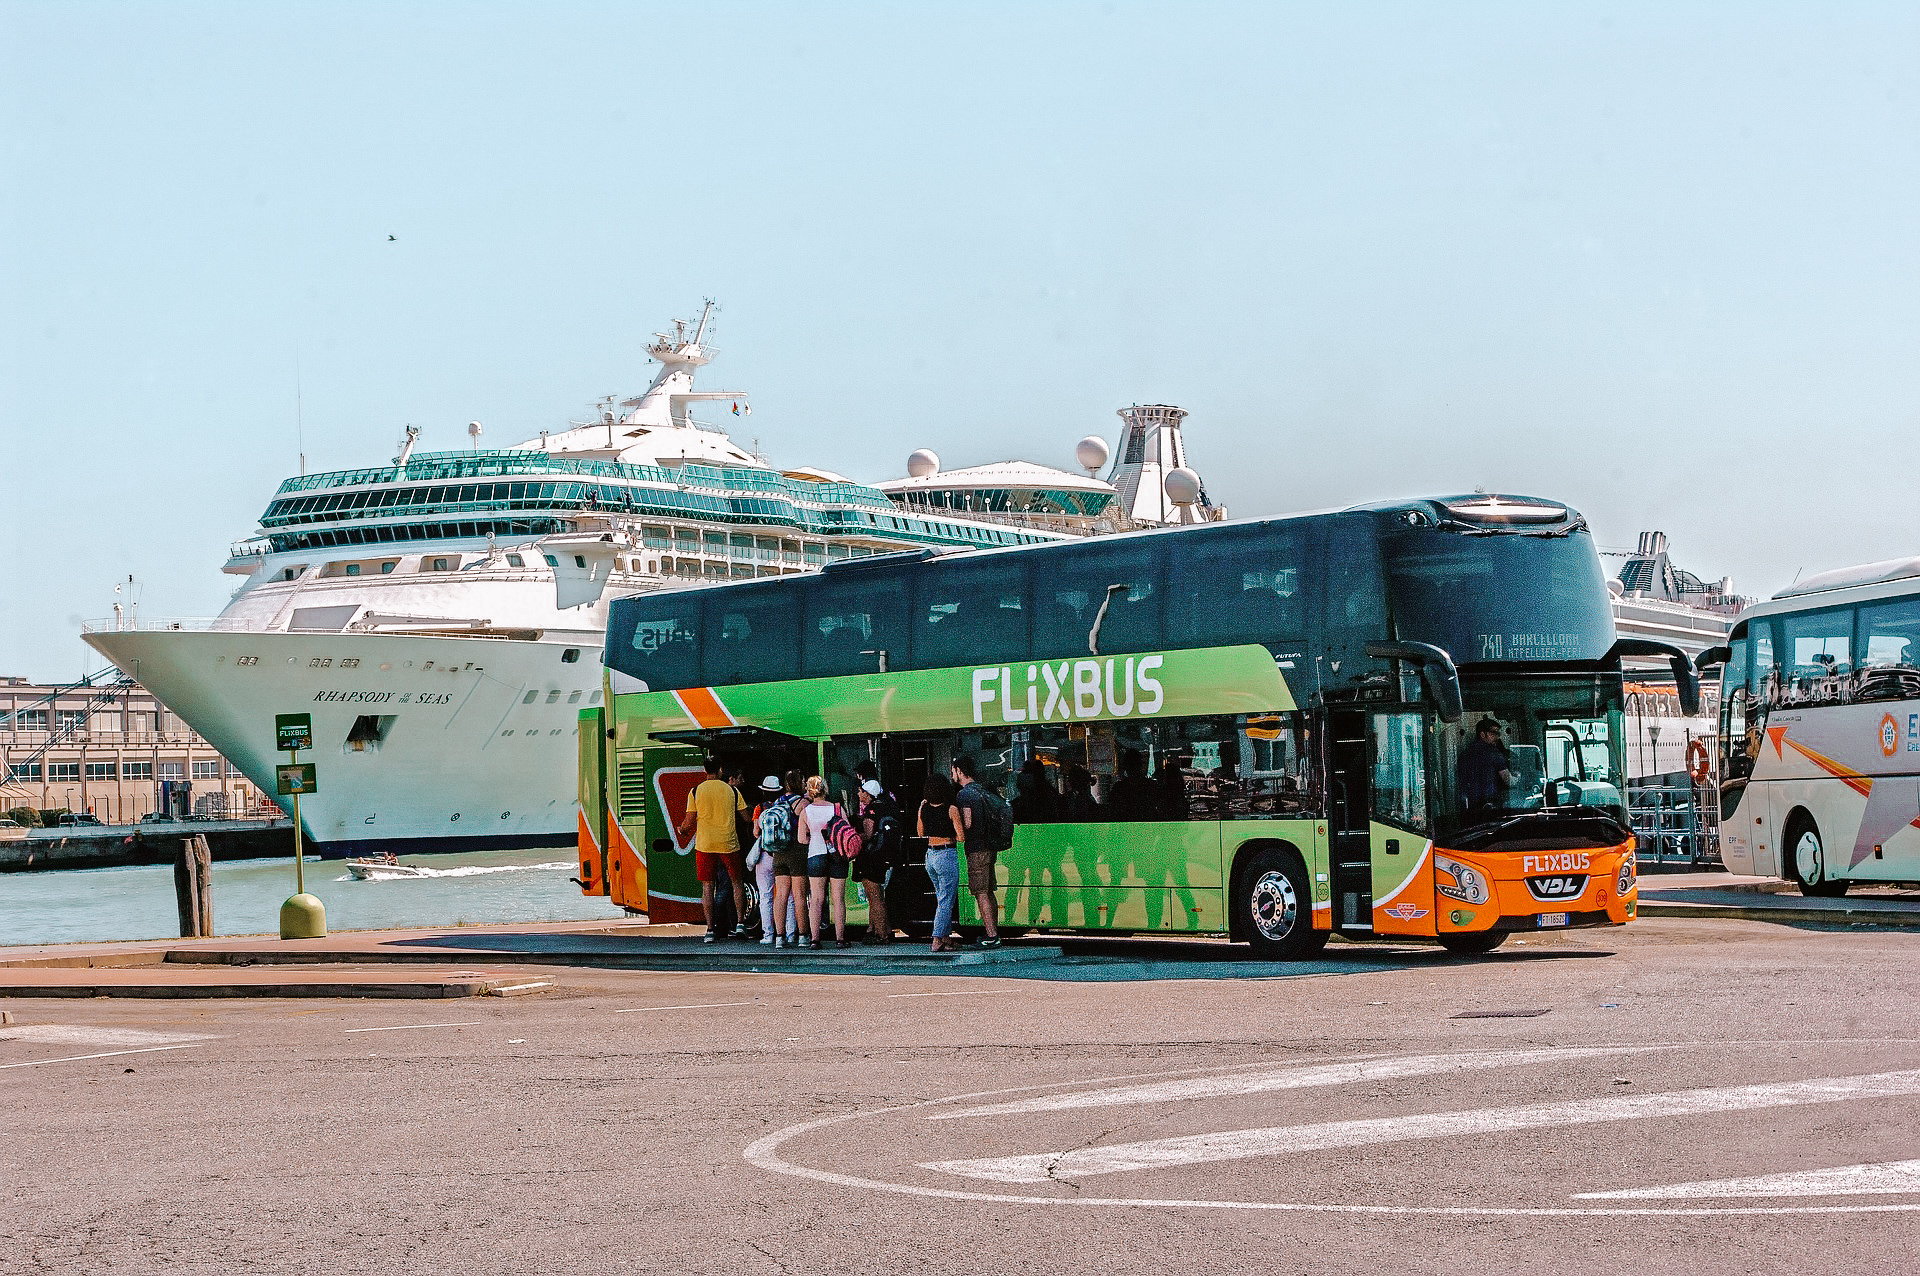 A picture of a green Flixbus in a parking location at the edge of a port with a ferry in the background.